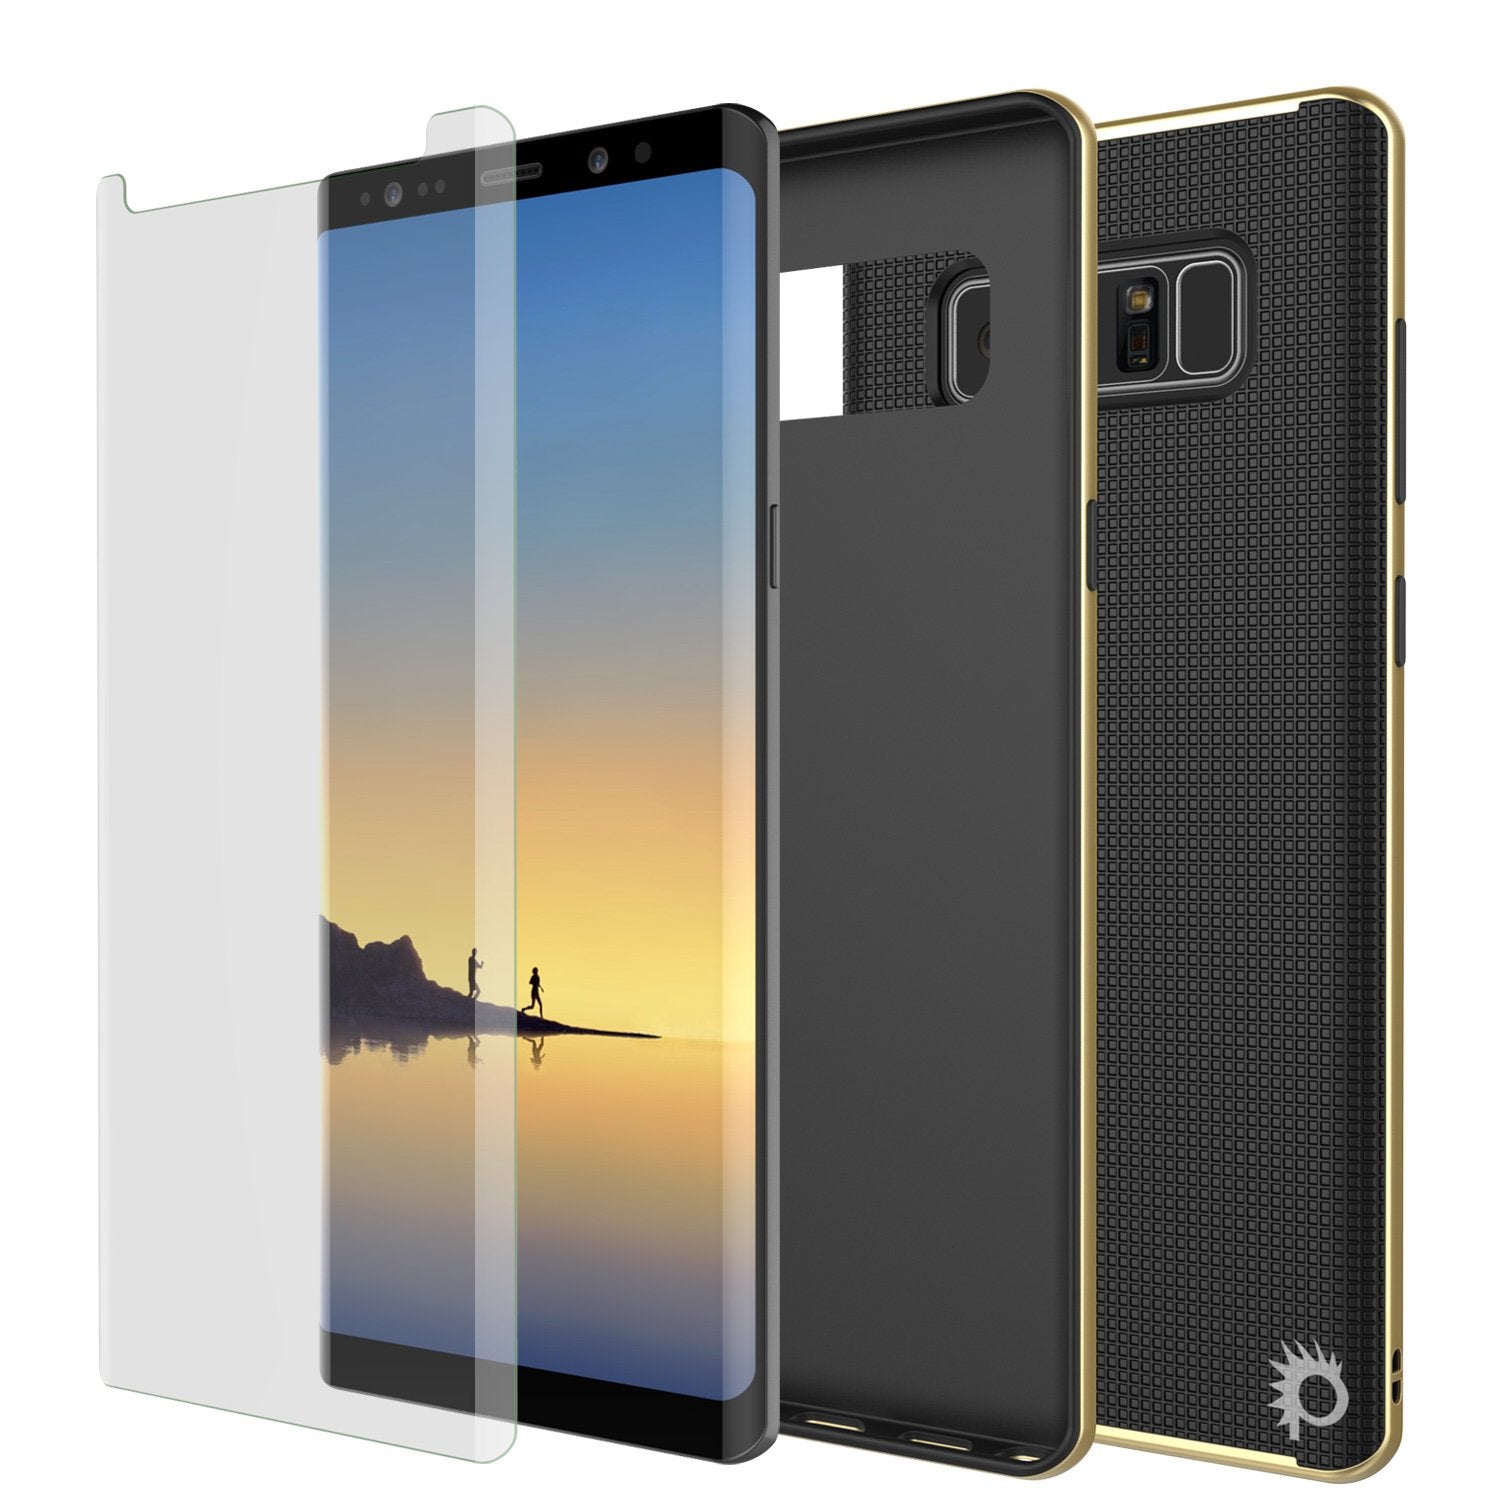 Galaxy Note 8 Case, PunkCase [Stealth Series] Hybrid 3-Piece Shockproof Dual Layer Cover [Non-Slip] [Soft TPU + PC Bumper] with PUNKSHIELD Screen Protector for Samsung Note 8 [Gold] - PunkCase NZ